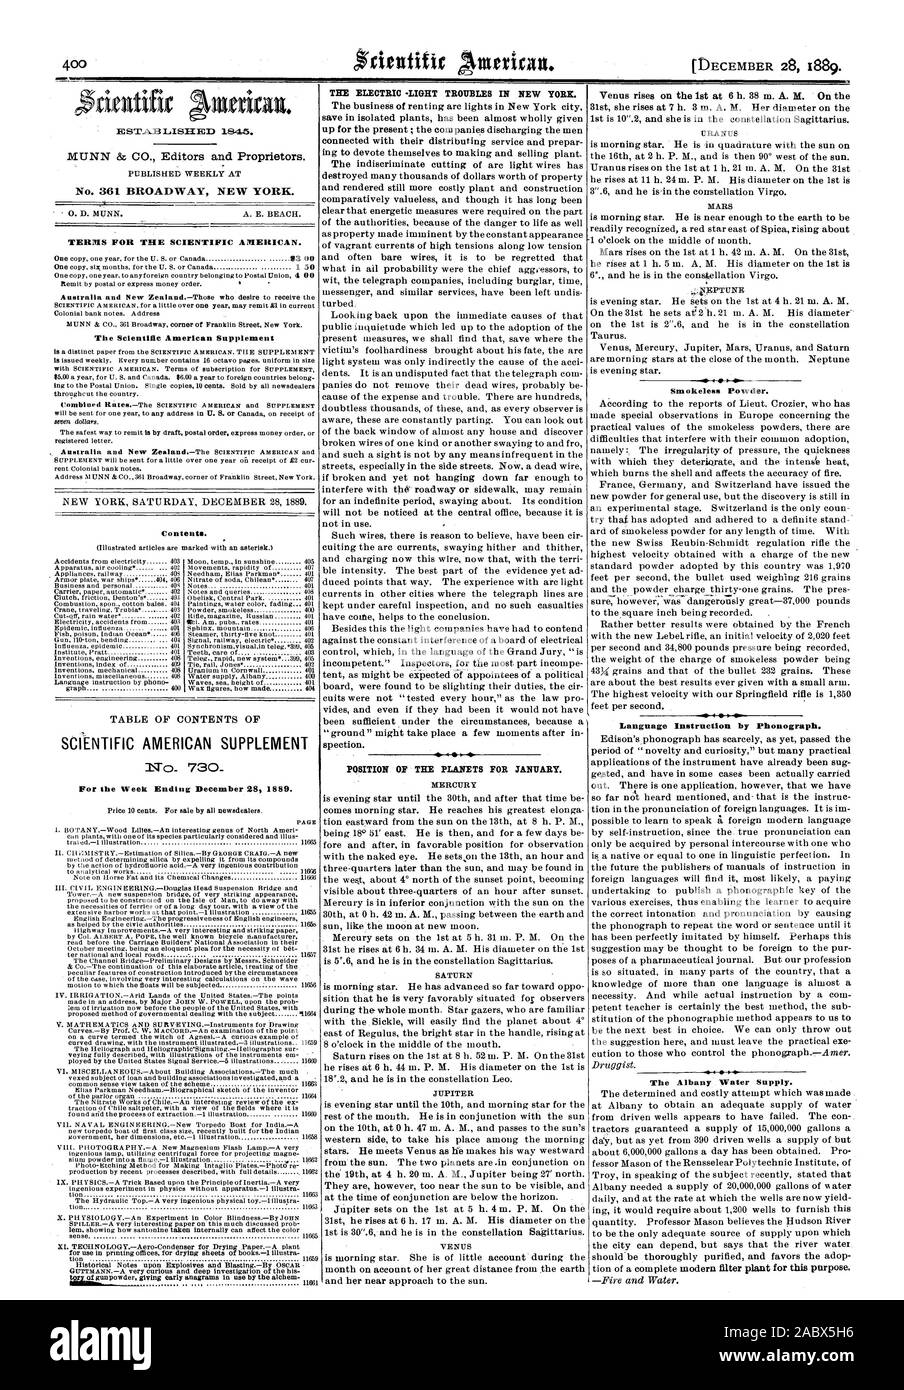 Week Ending December 28 1889. Price 10 cents. For sale by all newsdealers. Estimation of Silica.-By GEORGE CRAM.-A new by the action of hydrofluoric acid.-A very ingenious contribution ter national and local roads peculiar features of construction introduced by the circumstances of the case involving very interesting calculations on the wave motion to which the floats will be subjected 656 IV. IRRIGATION.-Arid Lands of the United States.-The points made in an address by Major JOHN W. POWELL upon the prob lem of irrigation now before the people of the United States with proposed method of Stock Photo